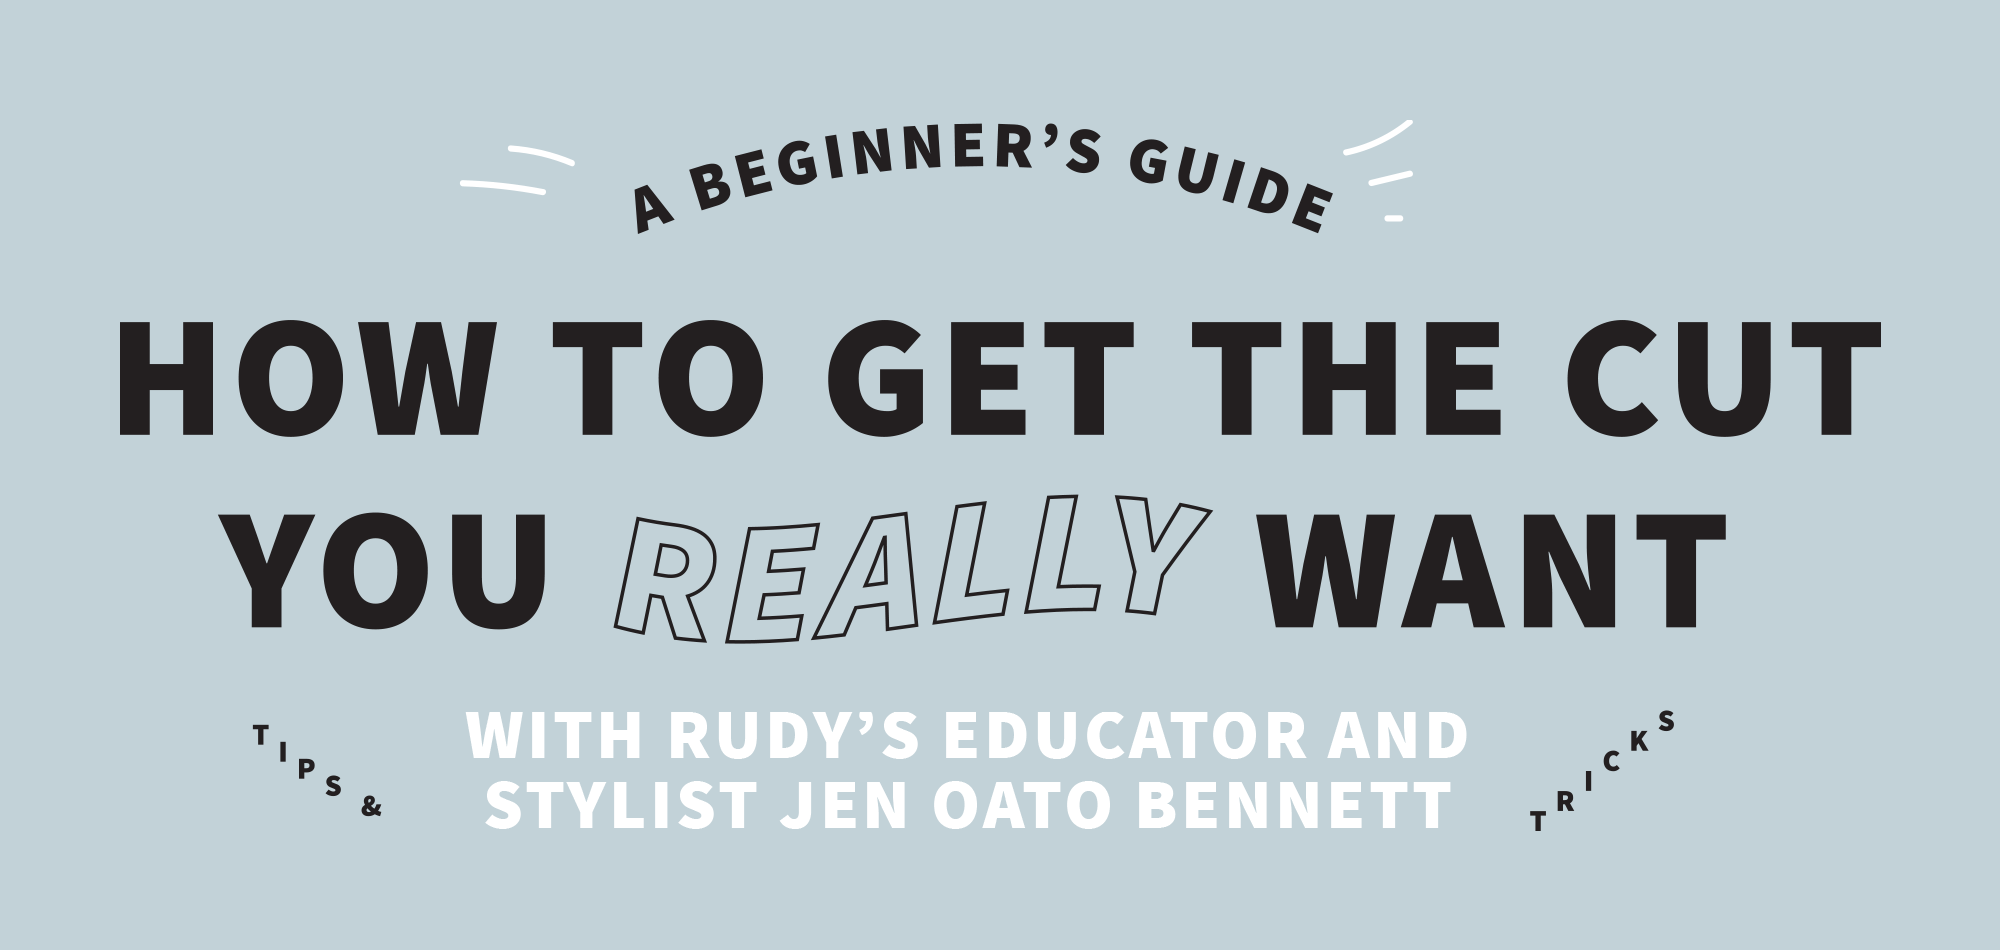 A Beginners Guide: How to Get the Cut You Really Want with Rudy's stylist and educator Jen Oato Bennett